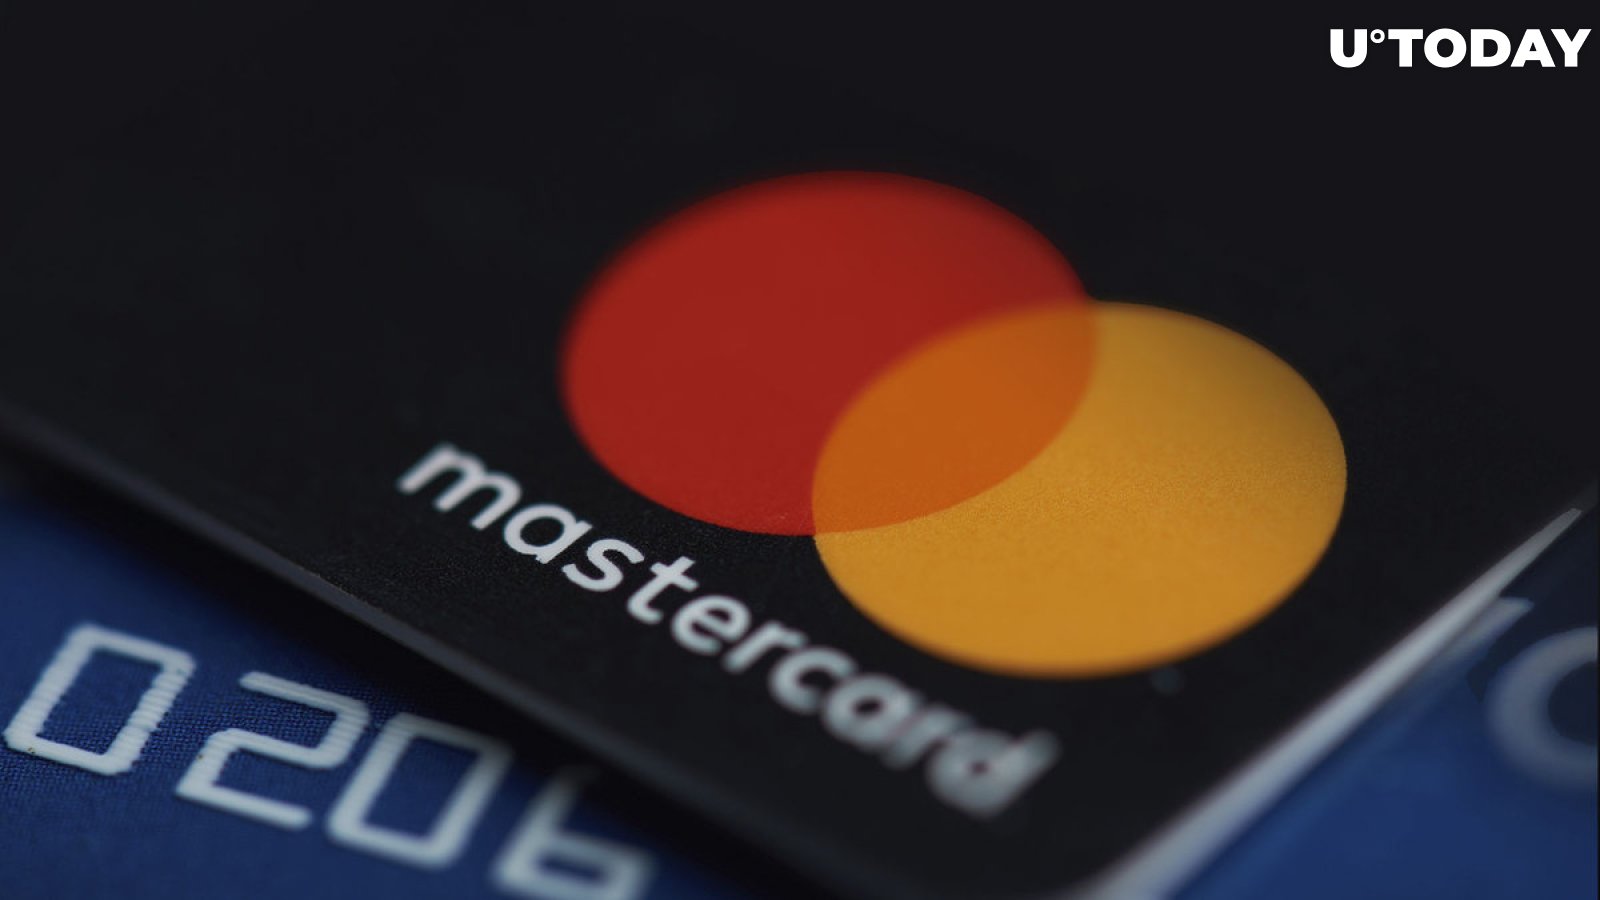 Mastercard Teams up With Crypto Firms for Card Payment Options: Details